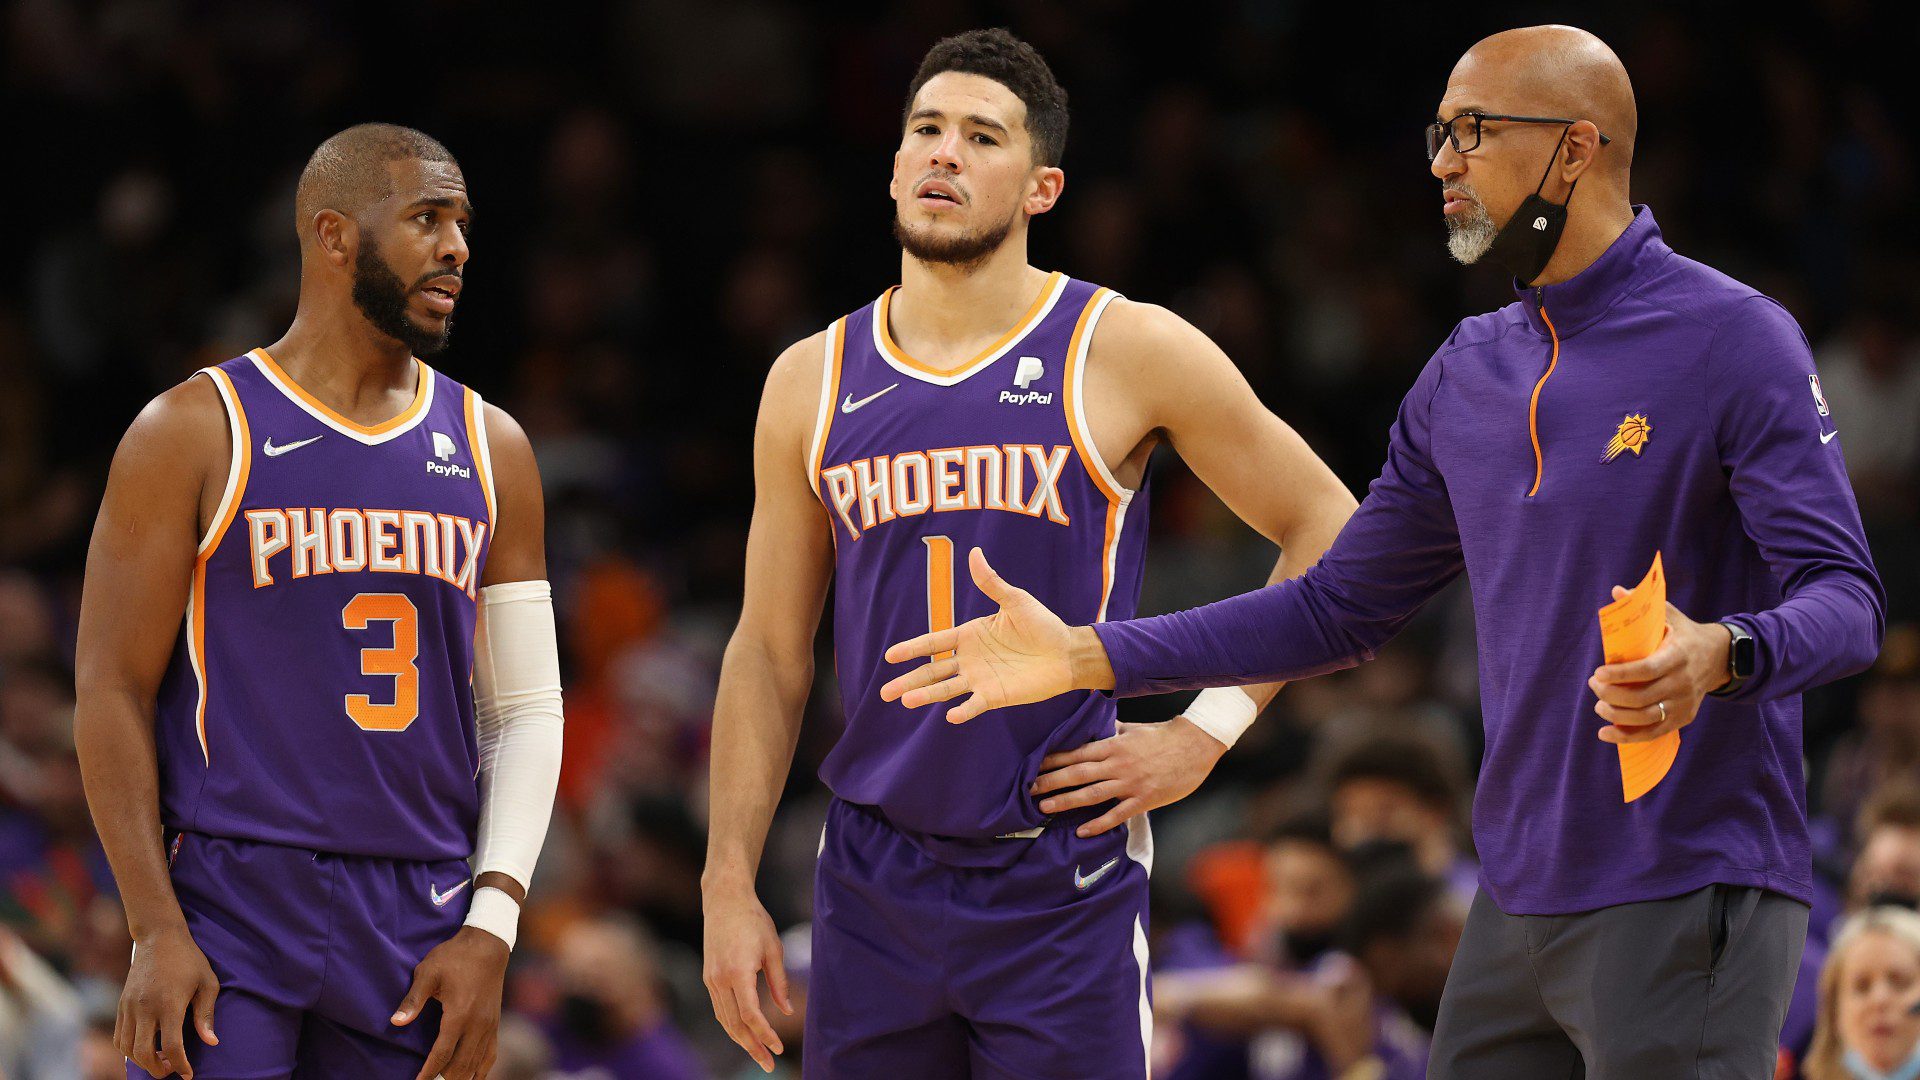 Suns Clinch Top Seed on Back of Booker’s 49 Points